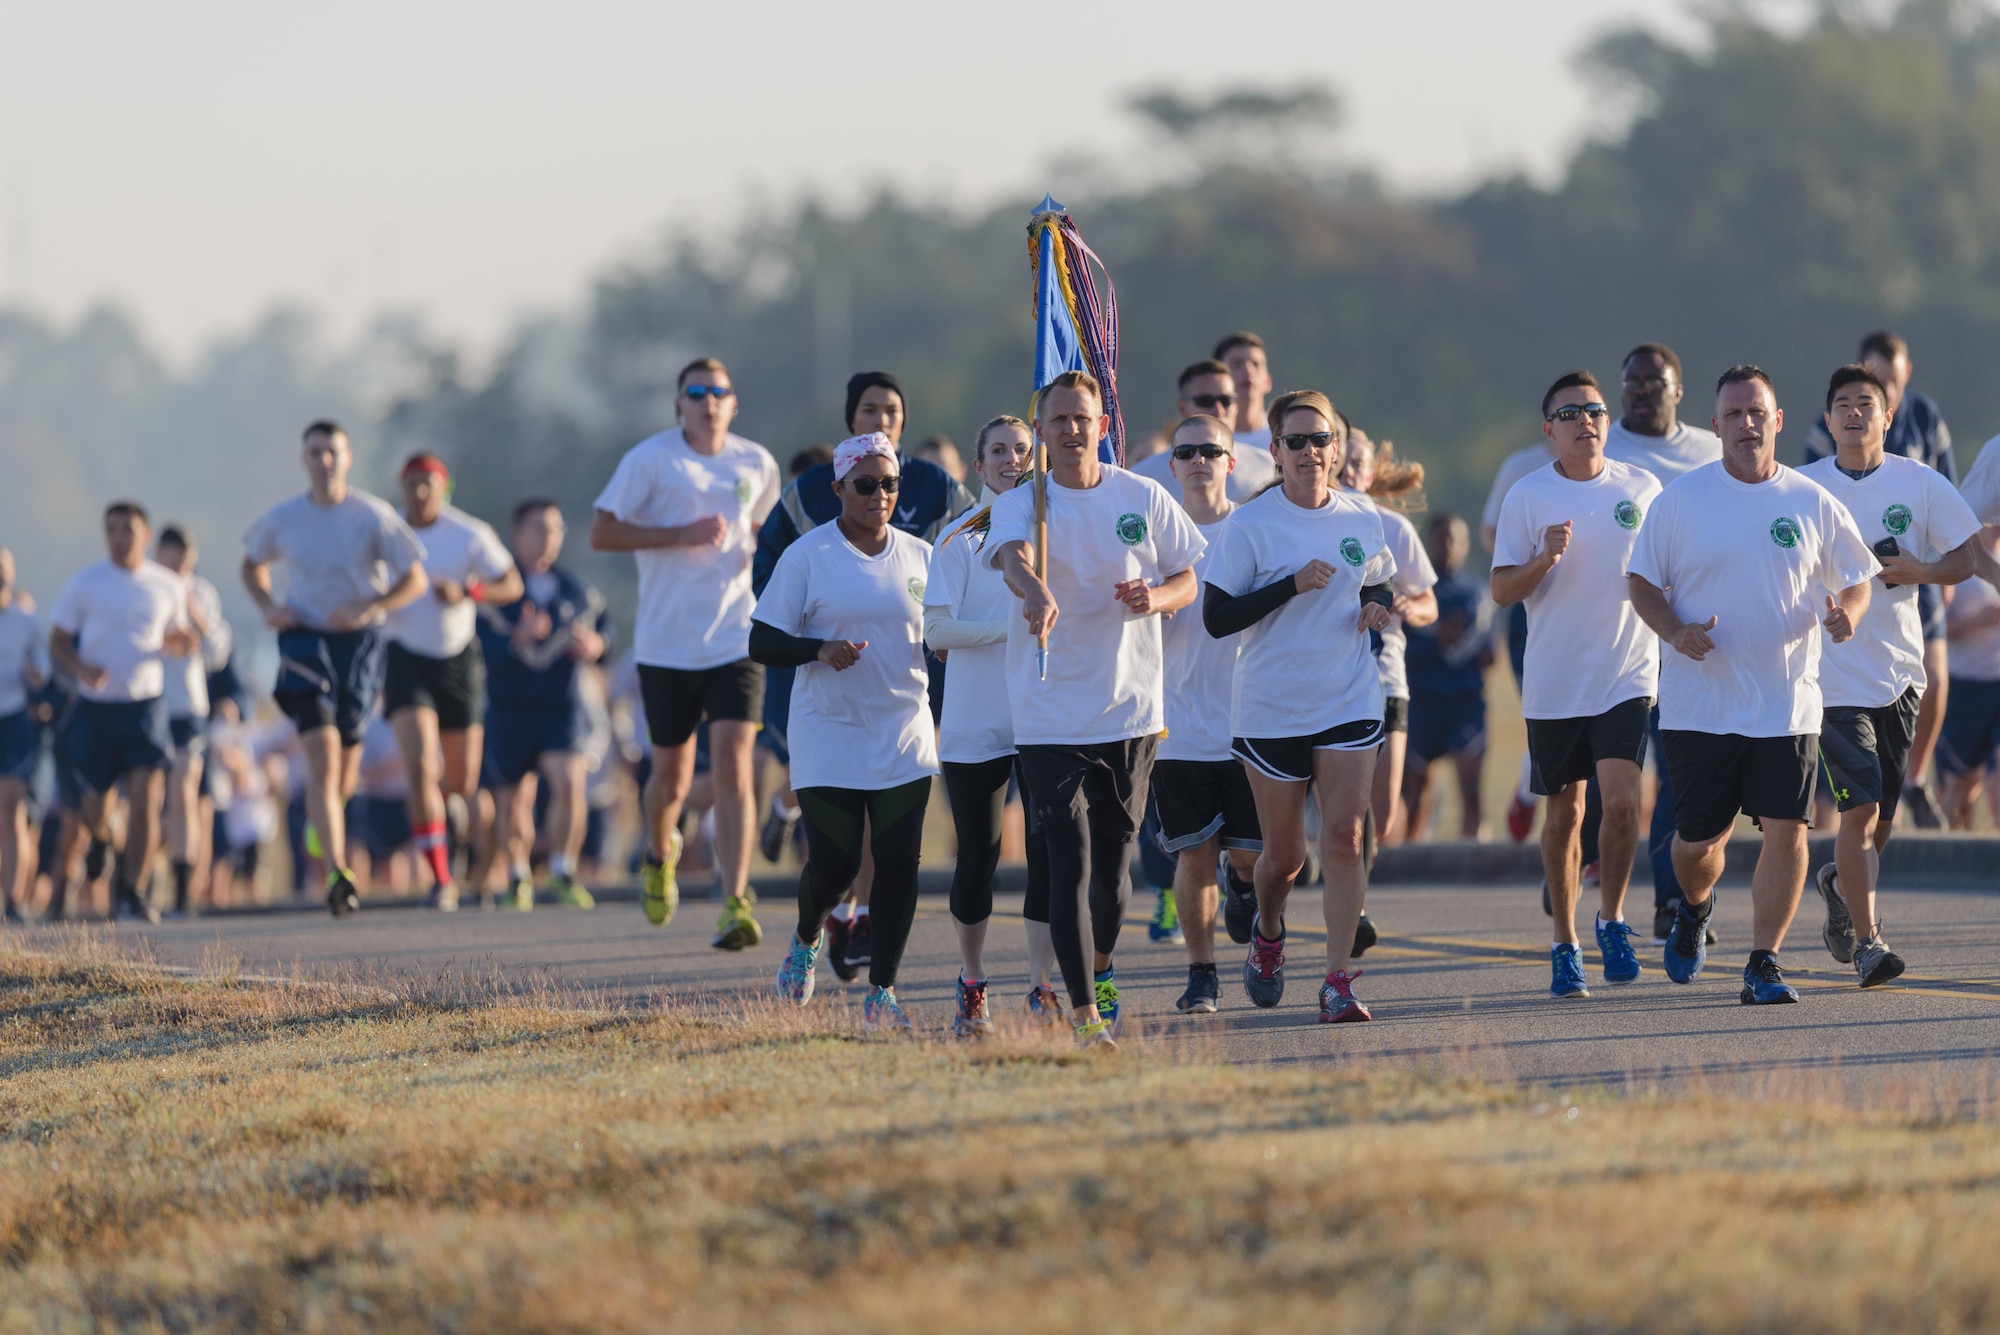 Col. Michele Edmondson, 81st Training Wing commander, and Chief Master Sgt. Anthony Fisher, 81st Training Group superintendent, participate in a Wing color run at the Marina Park Nov. 17, 2016, on Keesler Air Force Base, Miss. The run was one of several events held throughout Dragon Week, which focuses on resiliency and teambuilding initiatives across the base. (U.S. Air Force photo by André Askew/Released)